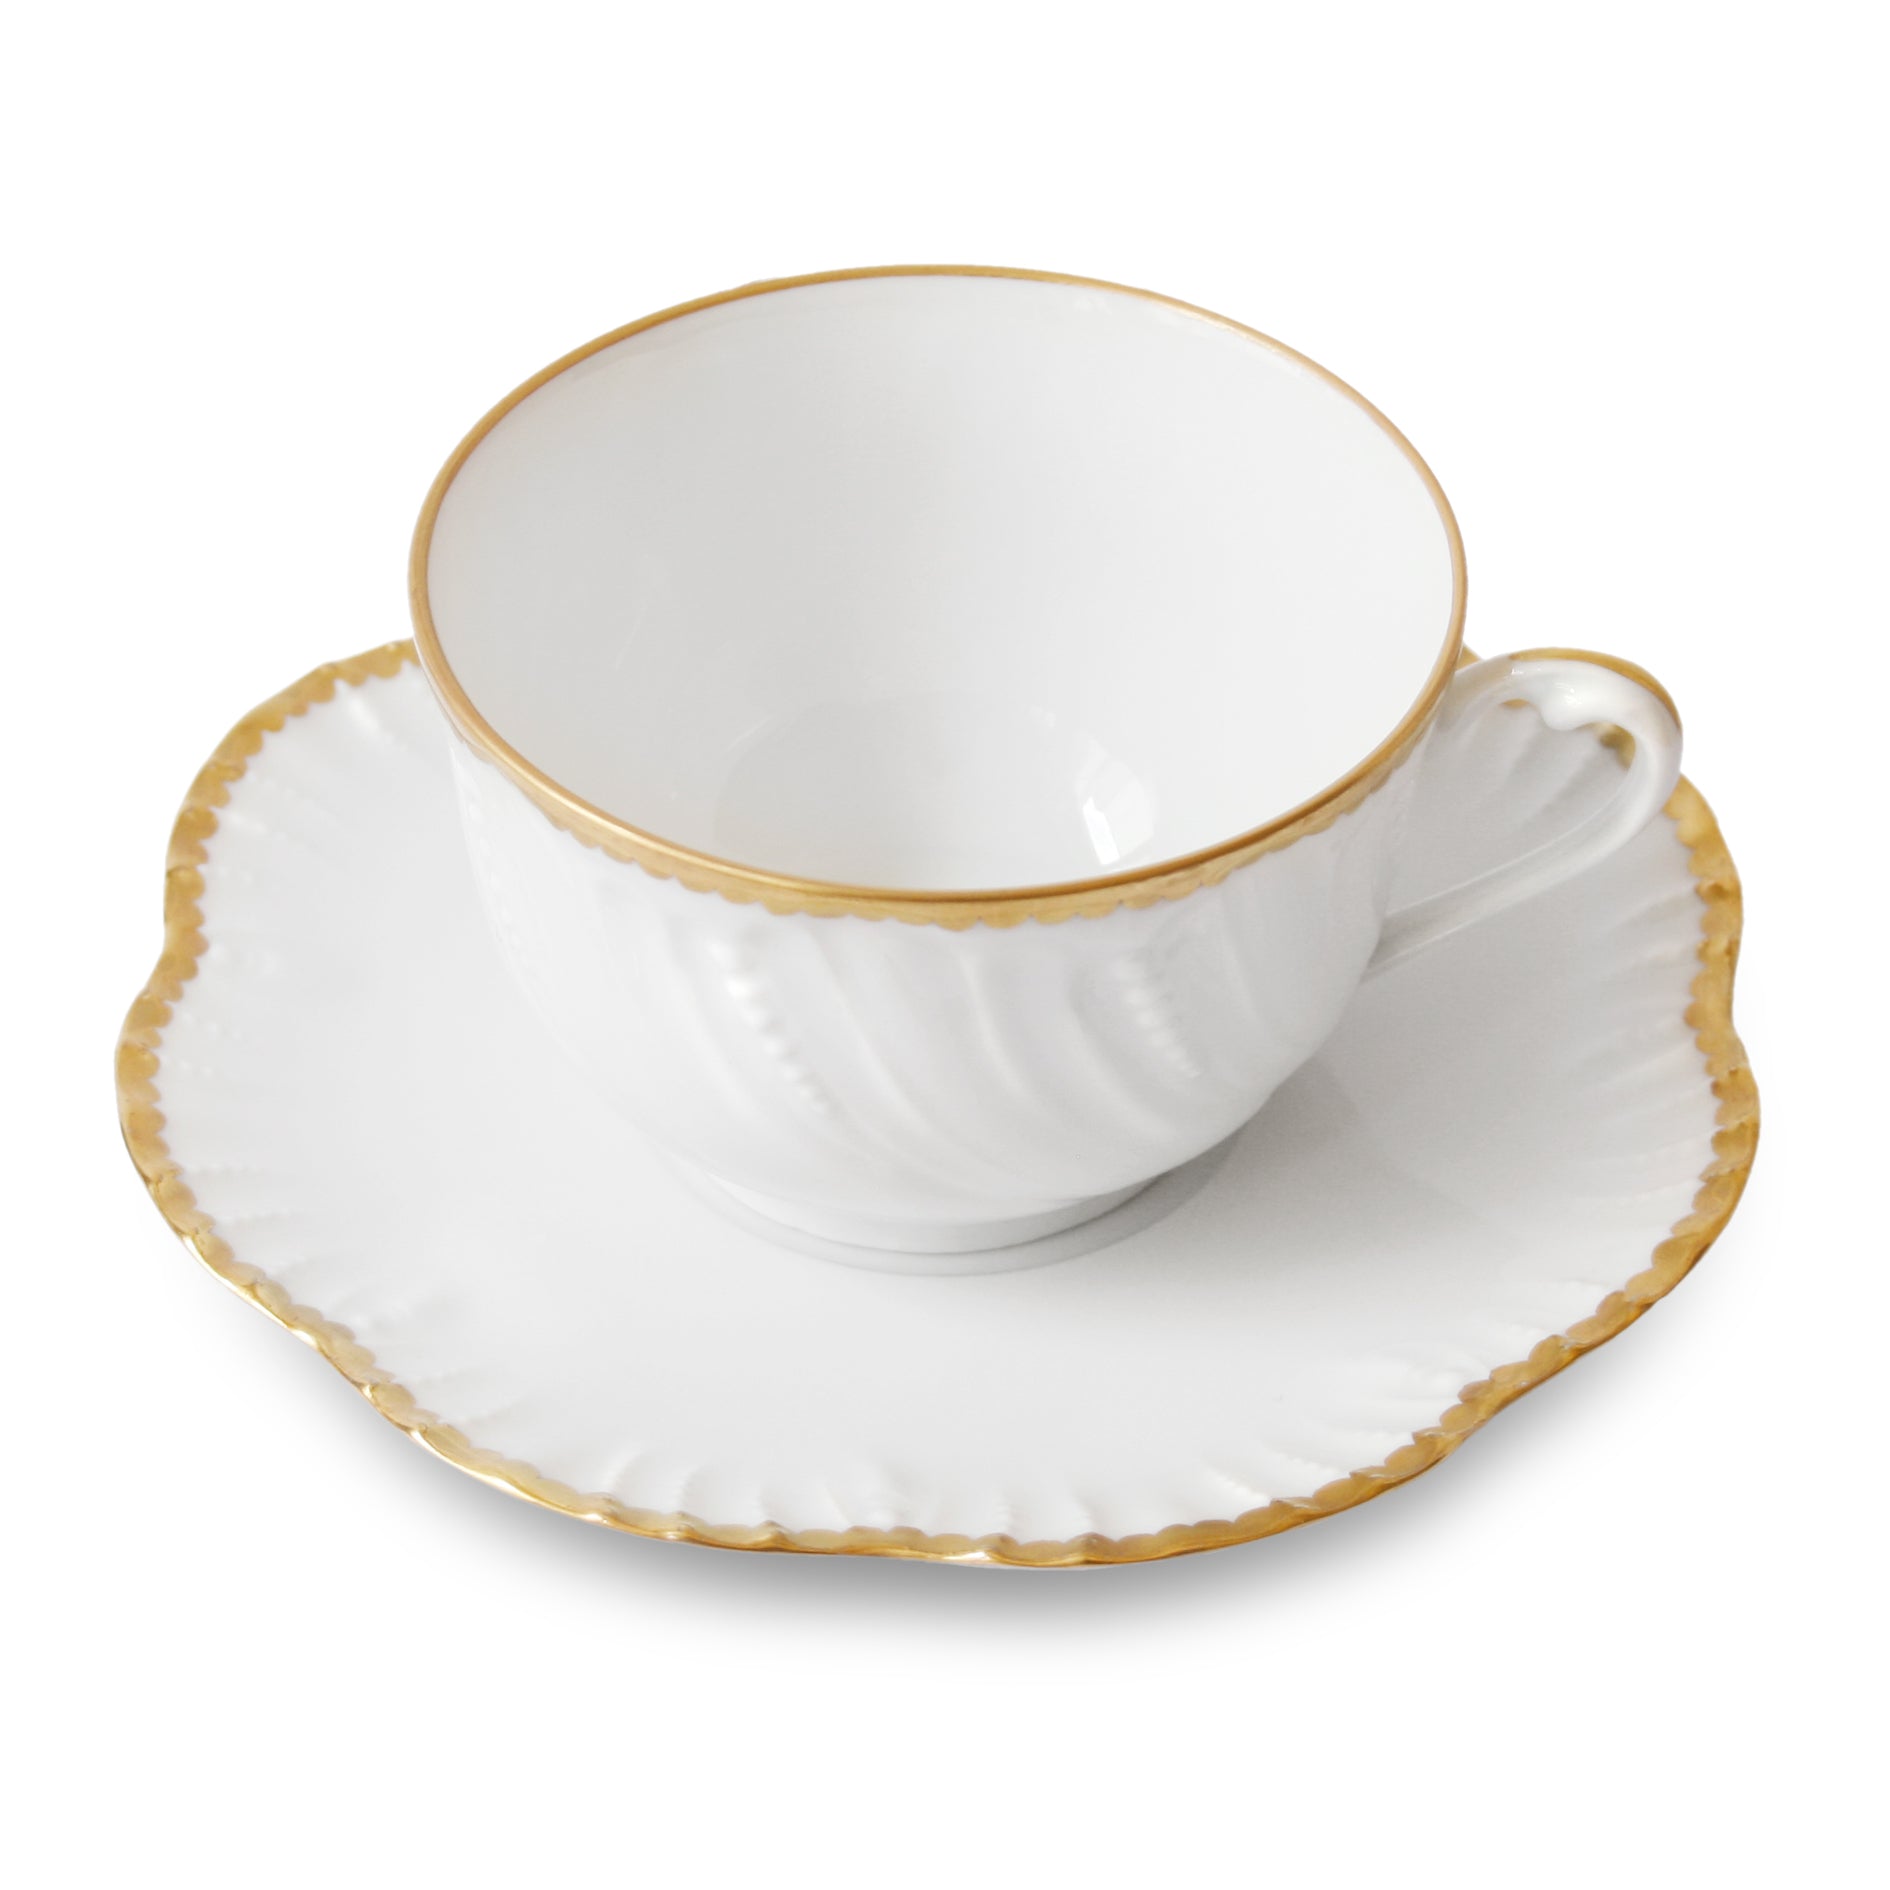 Simple dentelle - Tea cup and saucer
